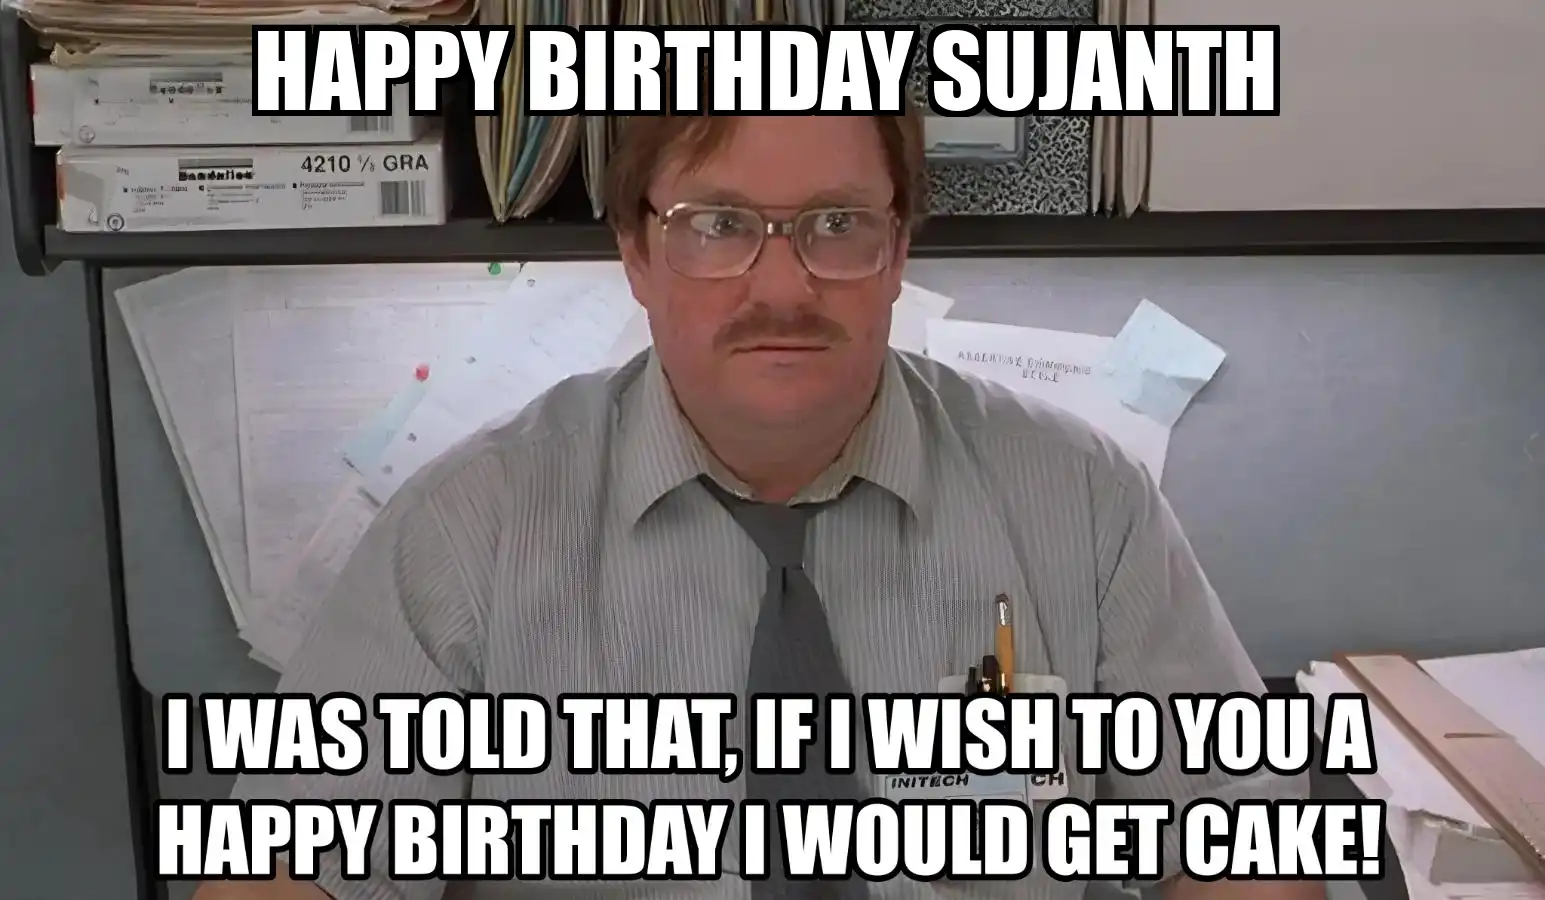 Happy Birthday Sujanth I Would Get A Cake Meme